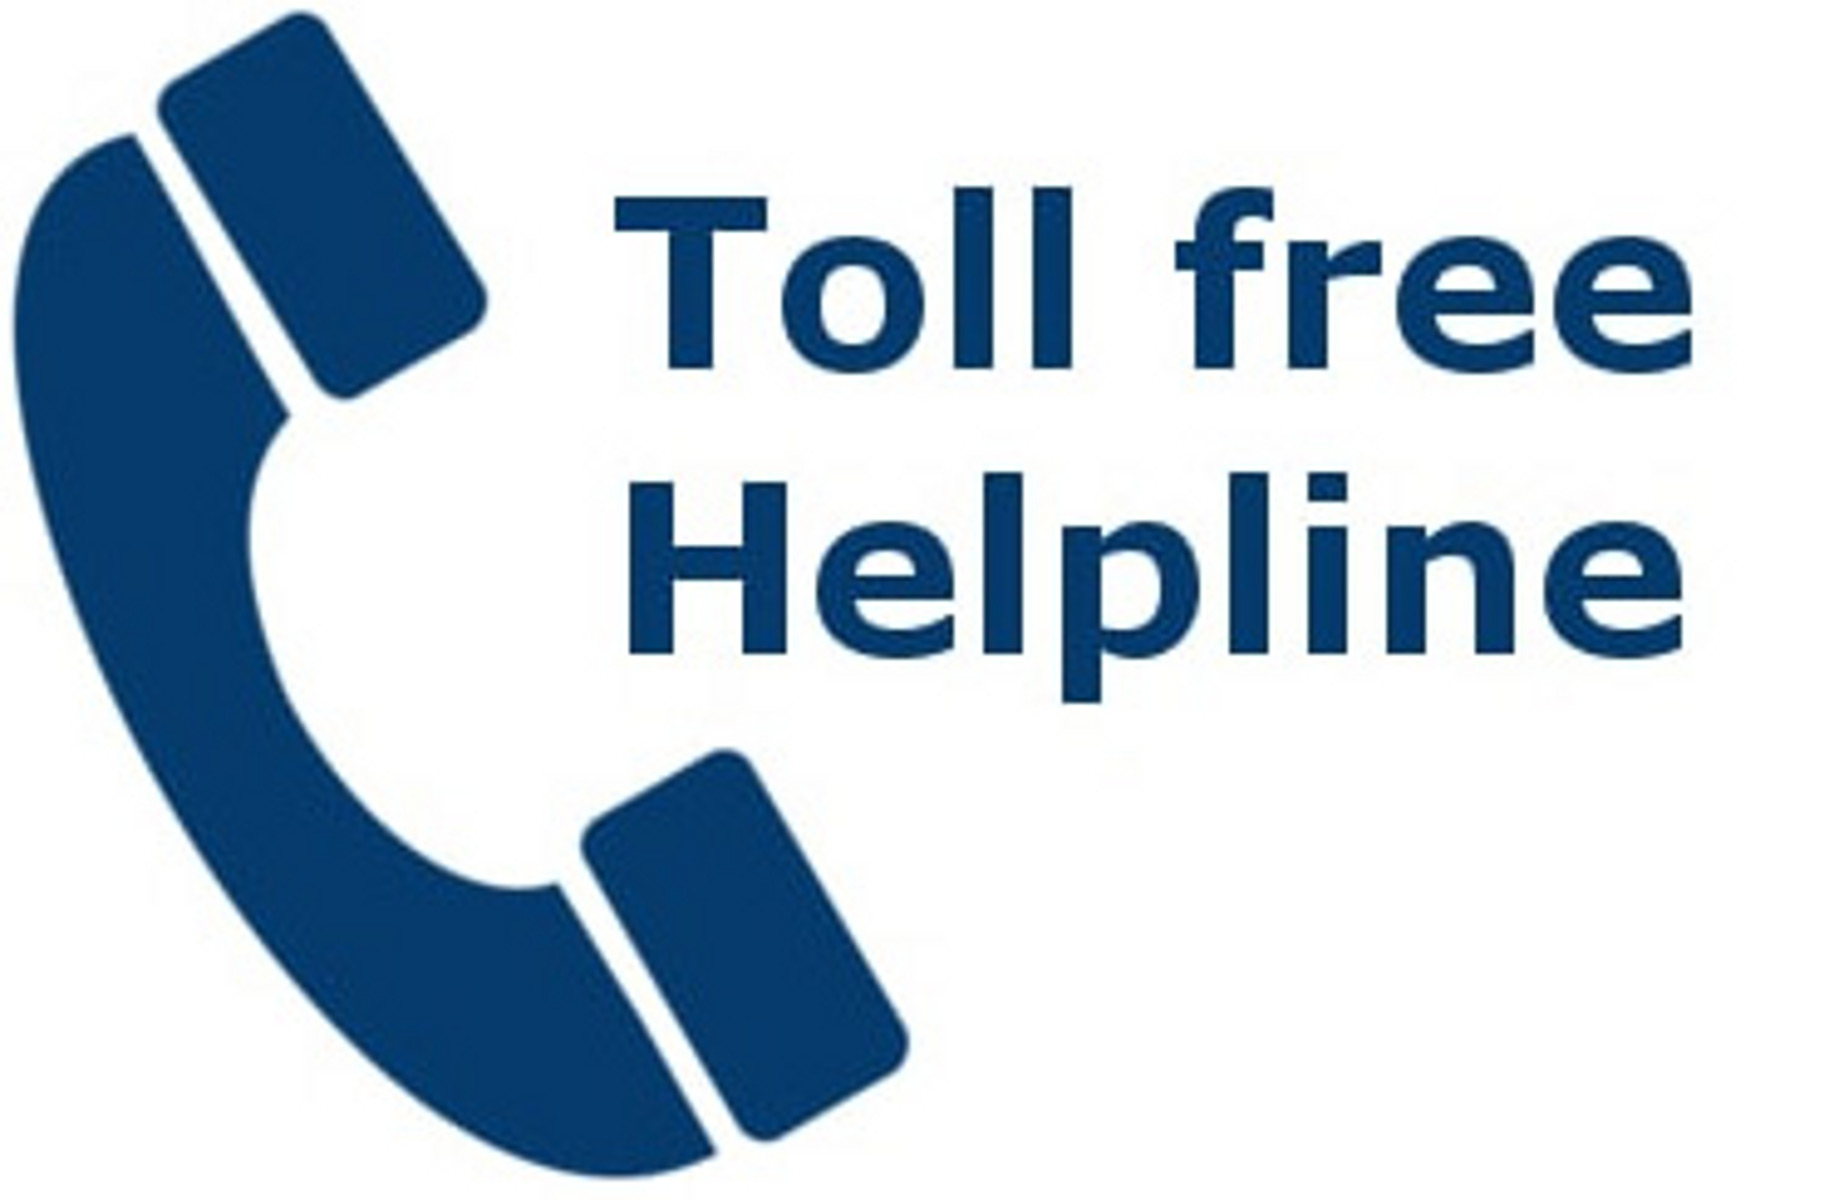 Helpline Logo Photos and Images | Shutterstock